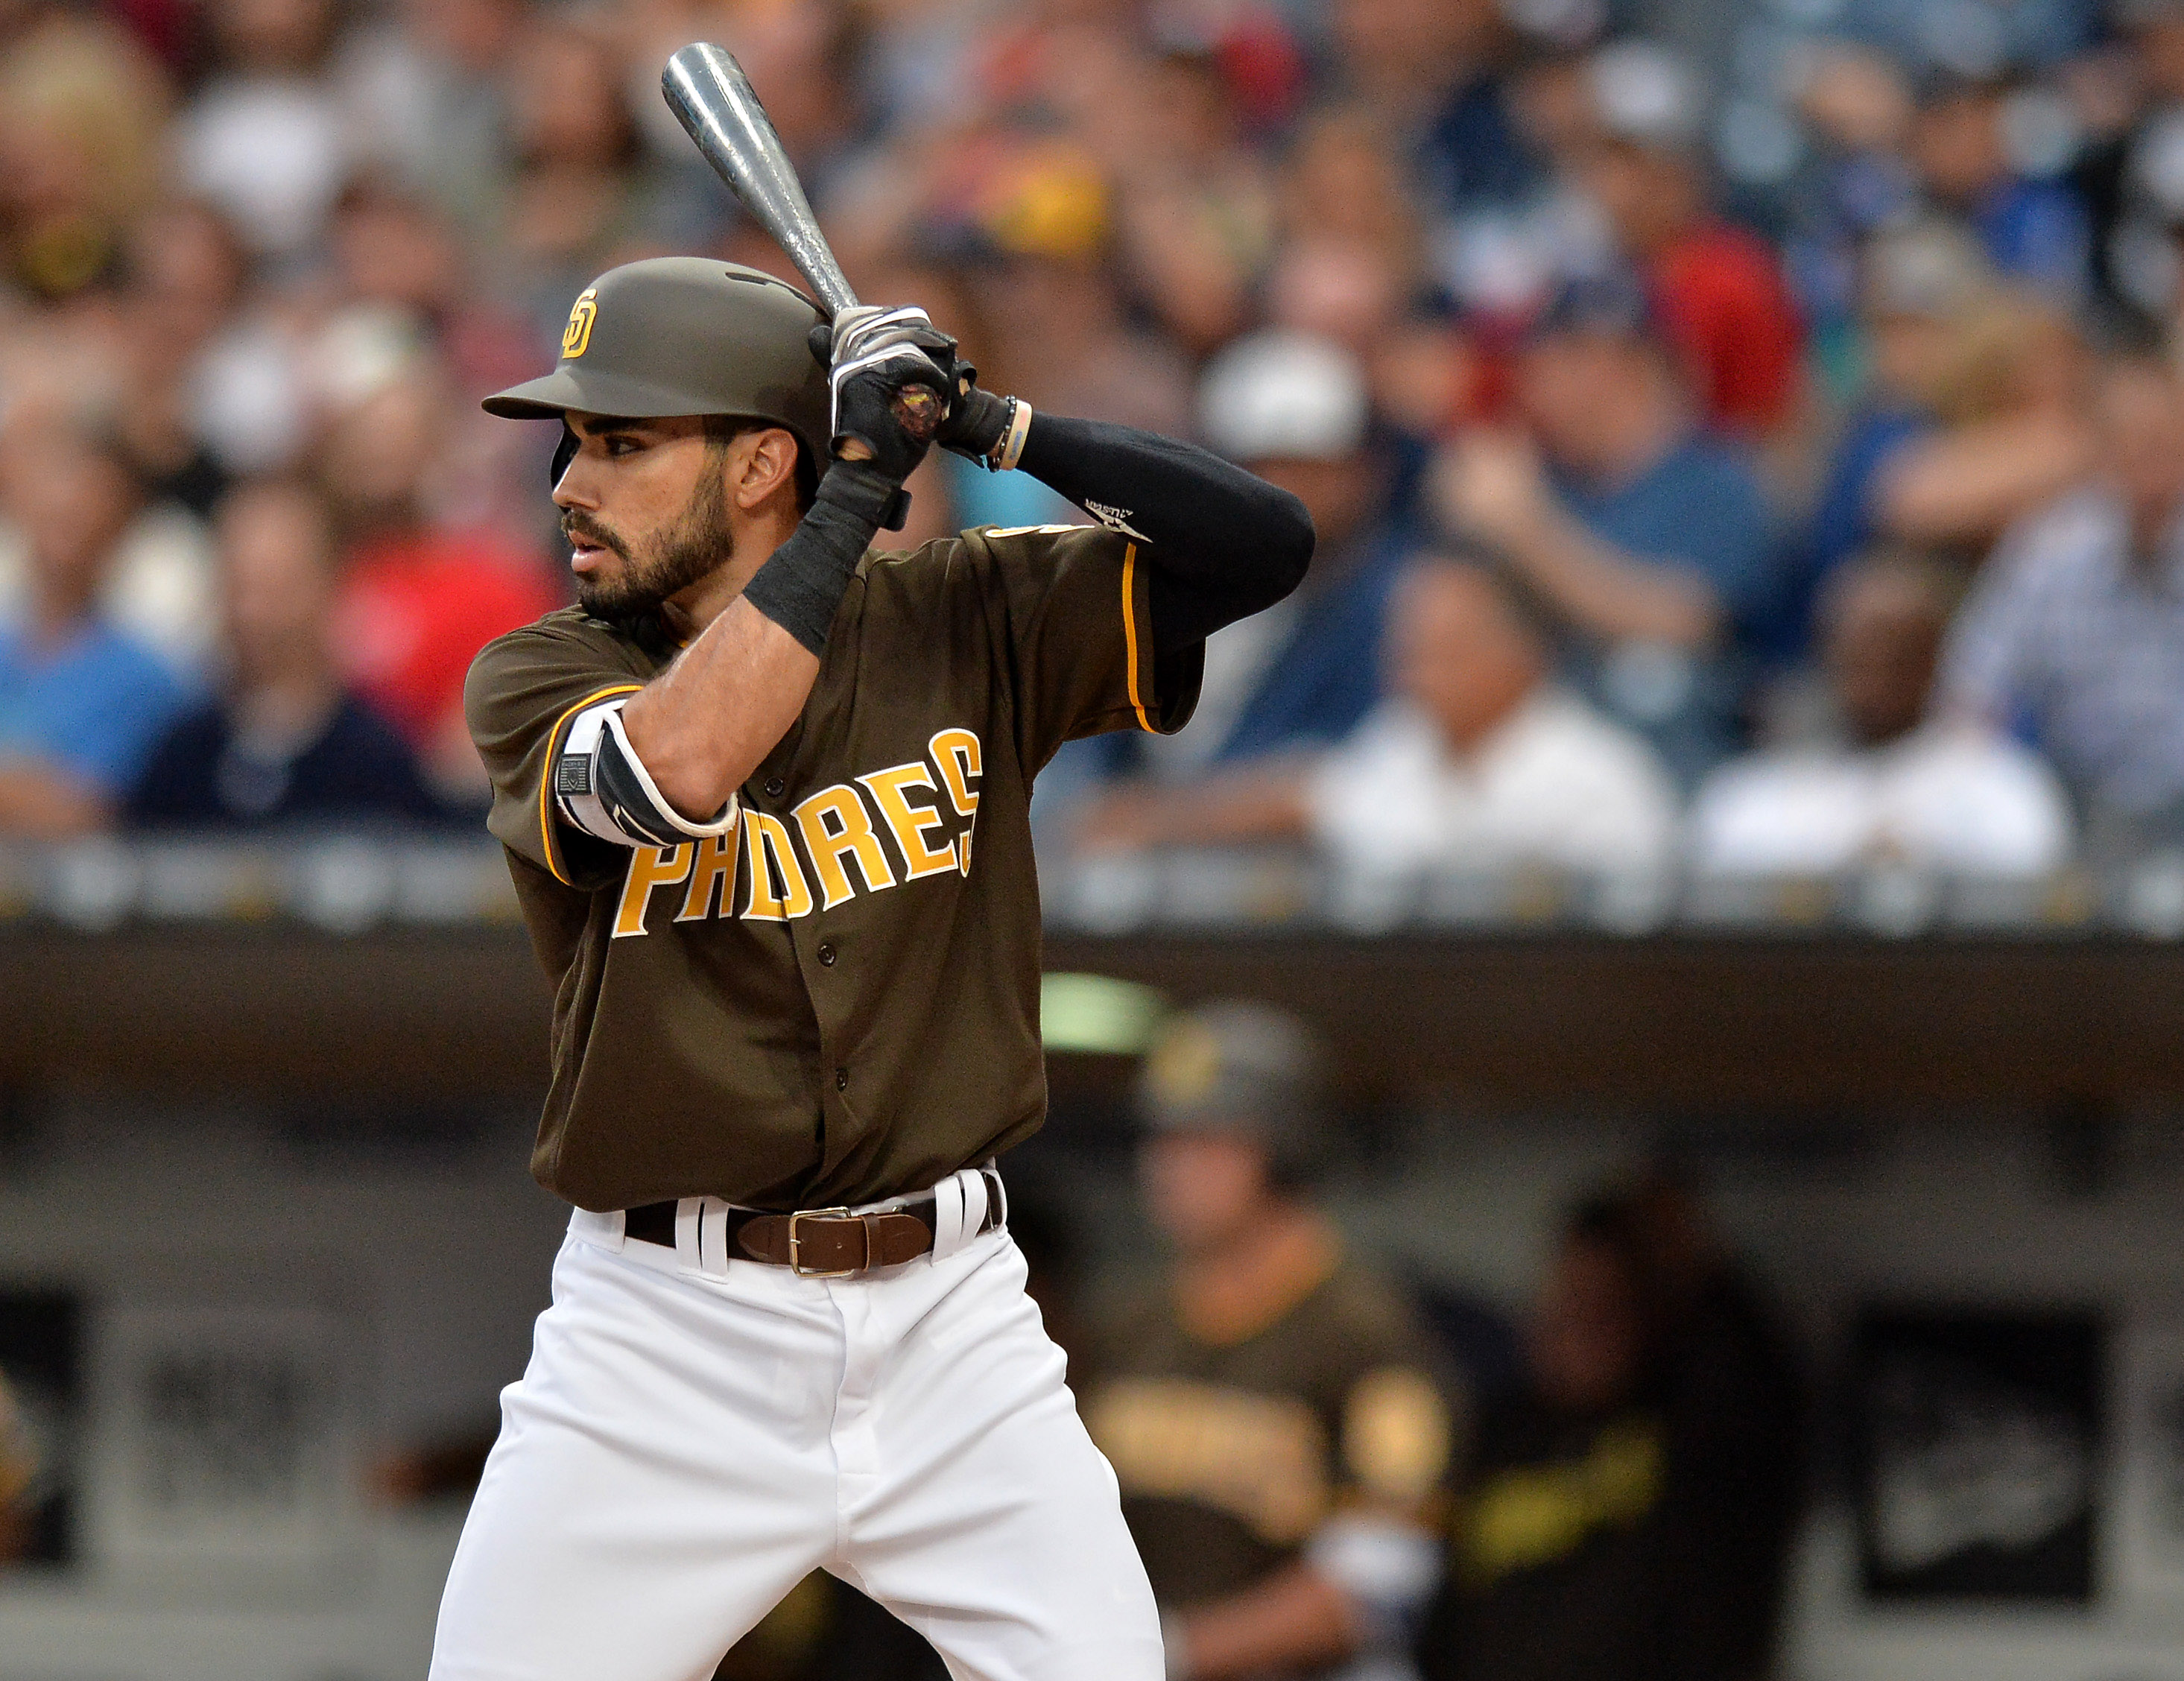 San Diego Padres: Finally a real opportunity for Carlos Asuaje